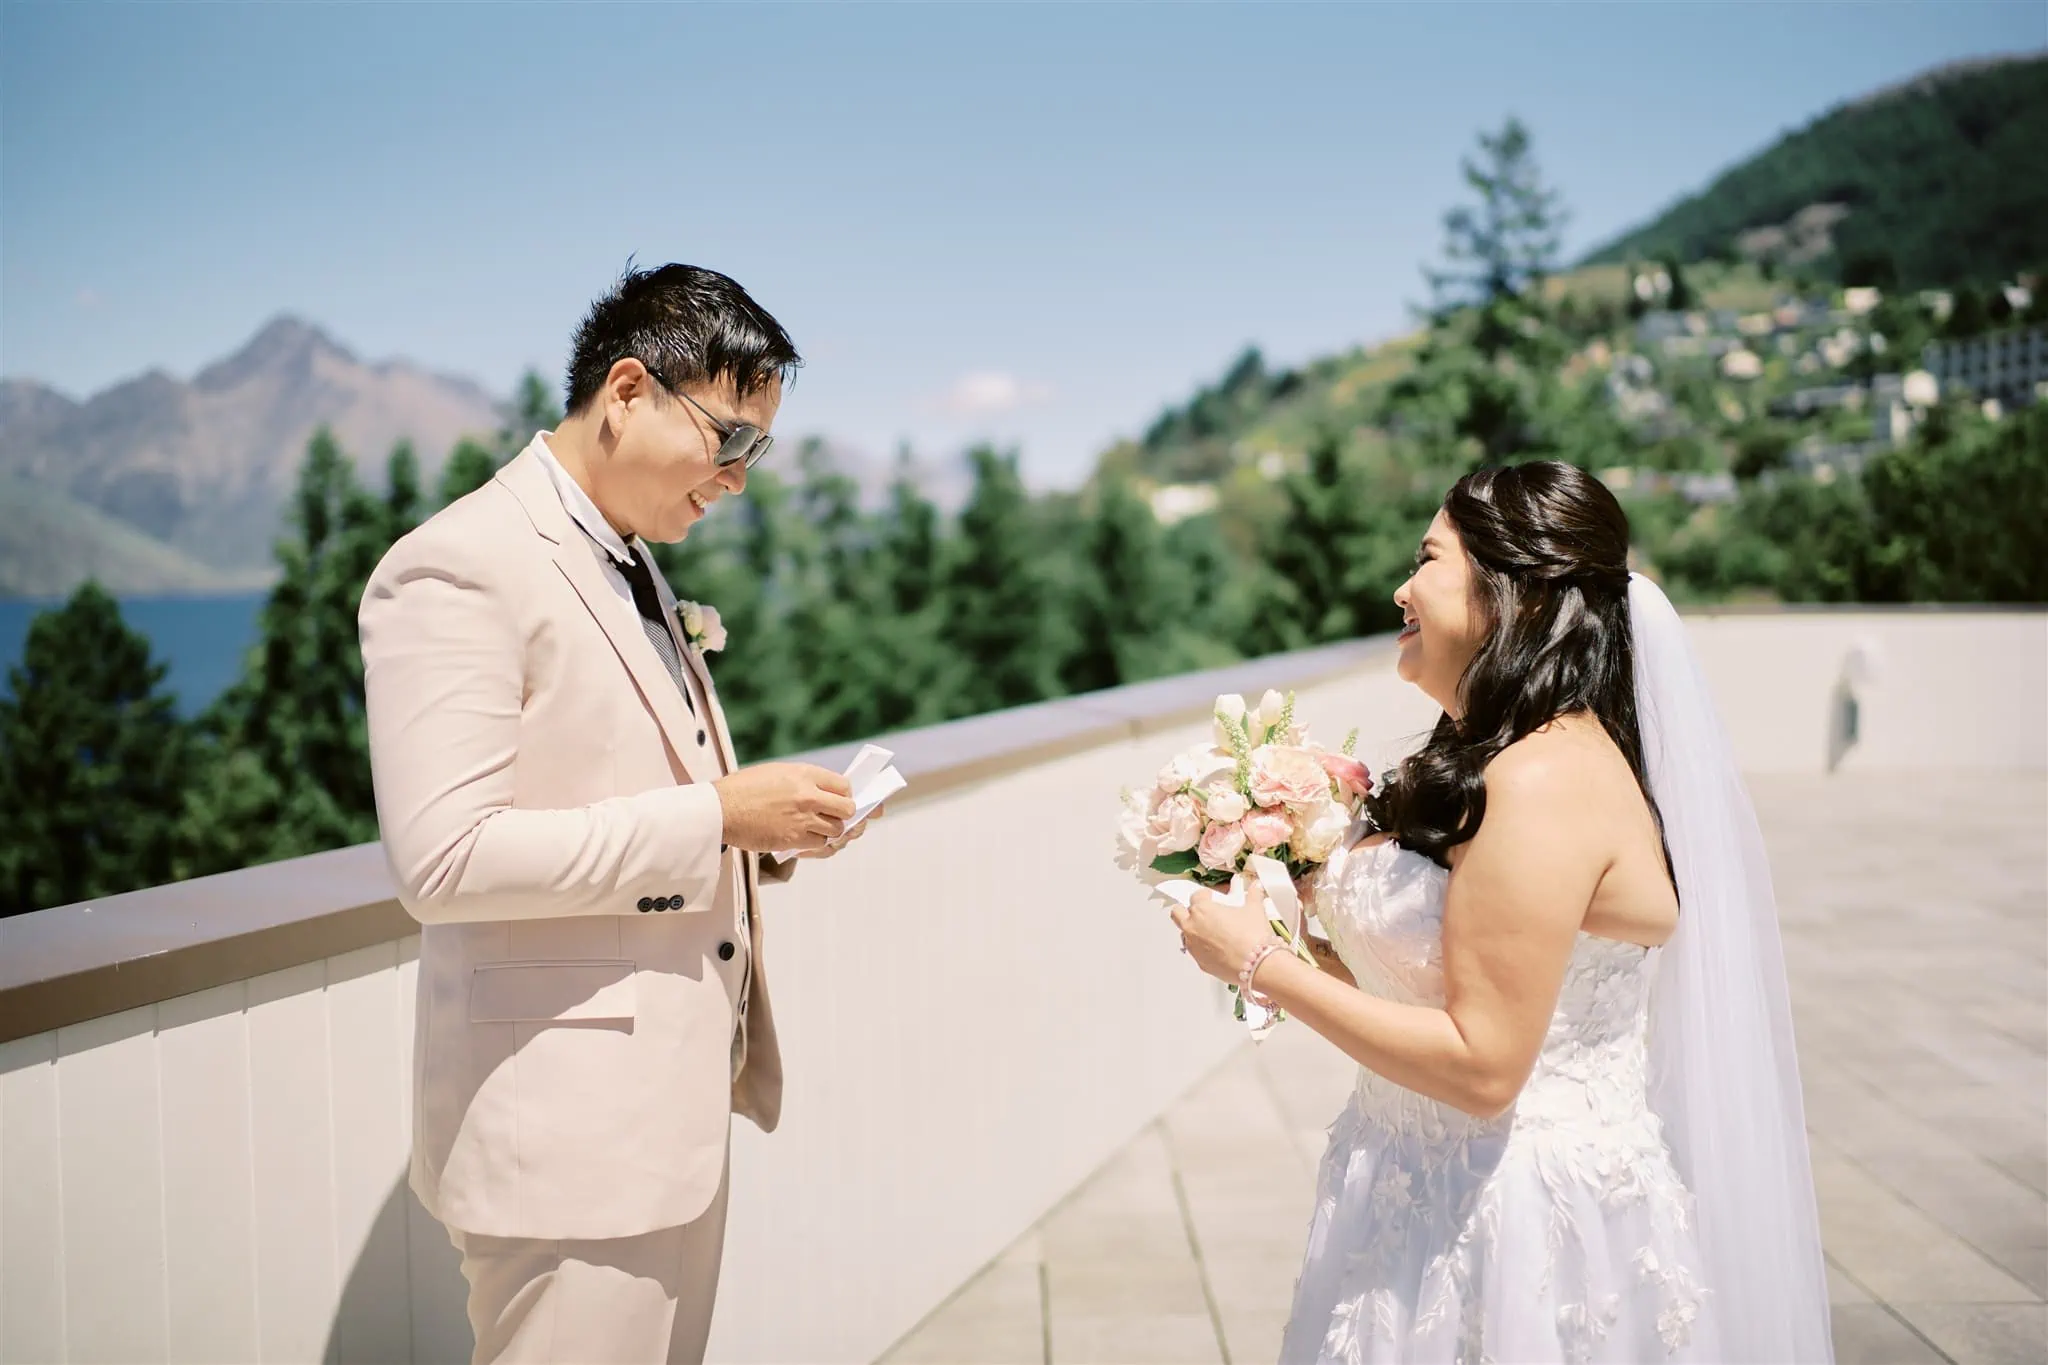 Queenstown Elopement Heli Wedding Photographer クイーンズタウン結婚式 | A Queenstown elopement featuring a bride and groom gazing at each other on a balcony.